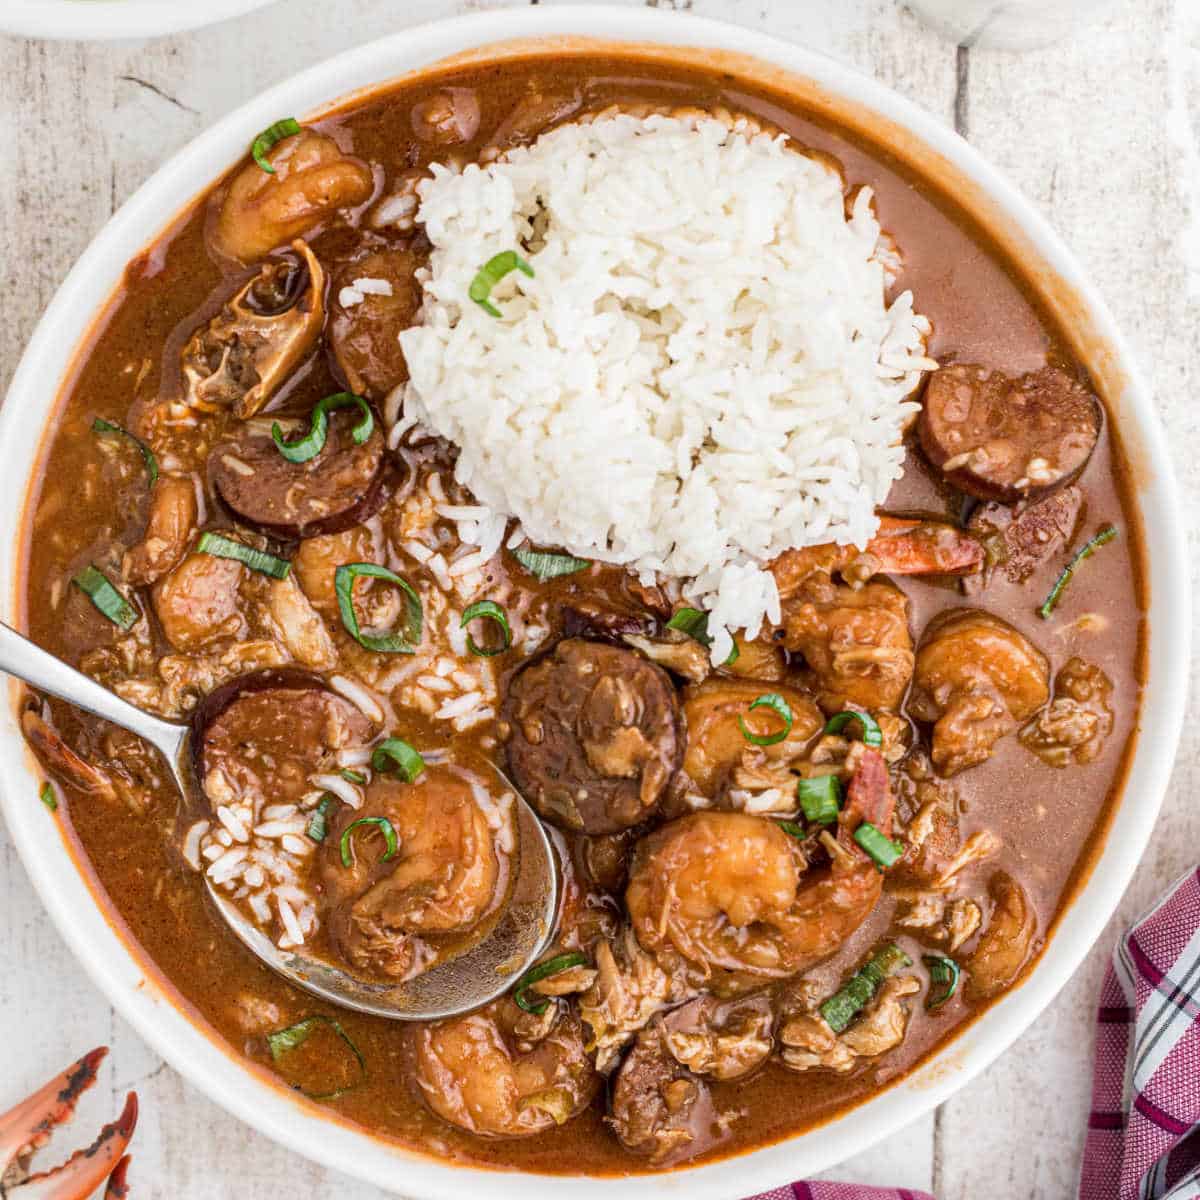 A bowl of gumbo, showing What To Serve With Seafood Gumbo.